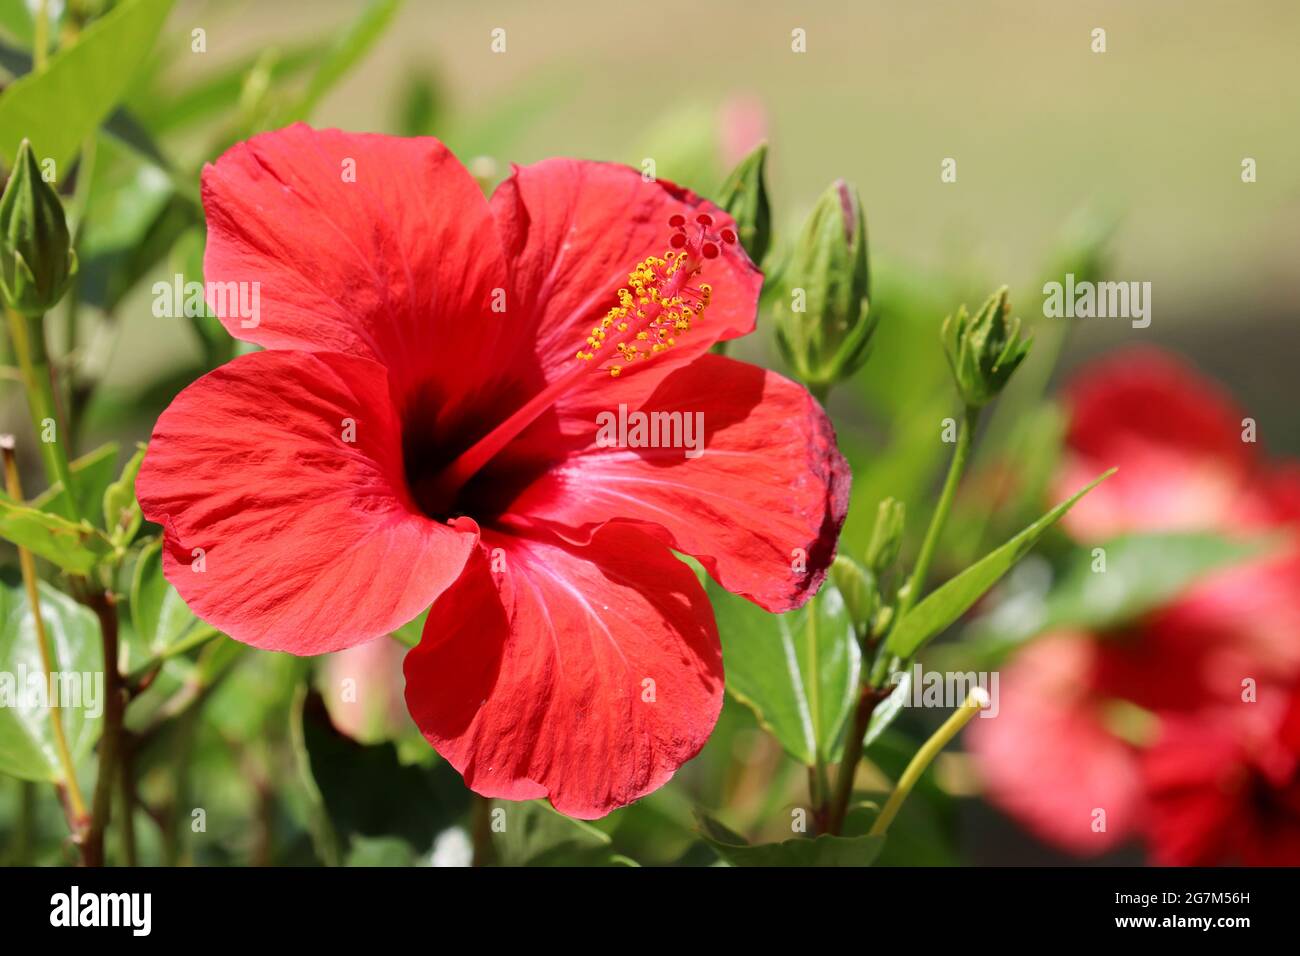 Red hibiscus flower on blurred nature background, tropical garden Stock Photo